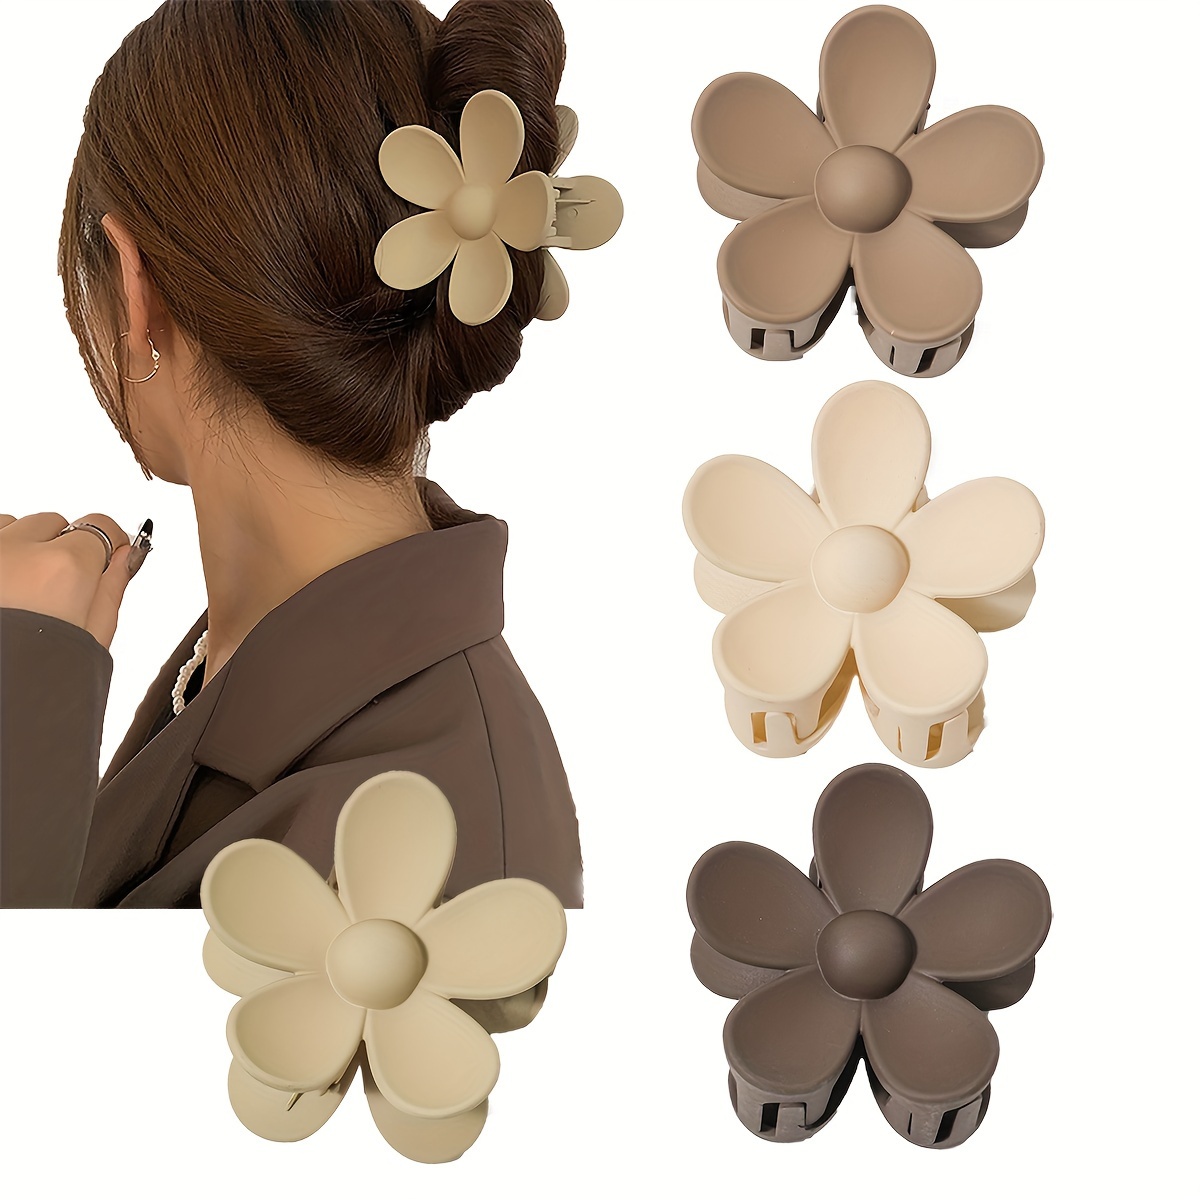 

4-piece Set Chic Matte Flower Hair Claw Clips For Women - Large, Solid Color, Simple & Stylish Accessories